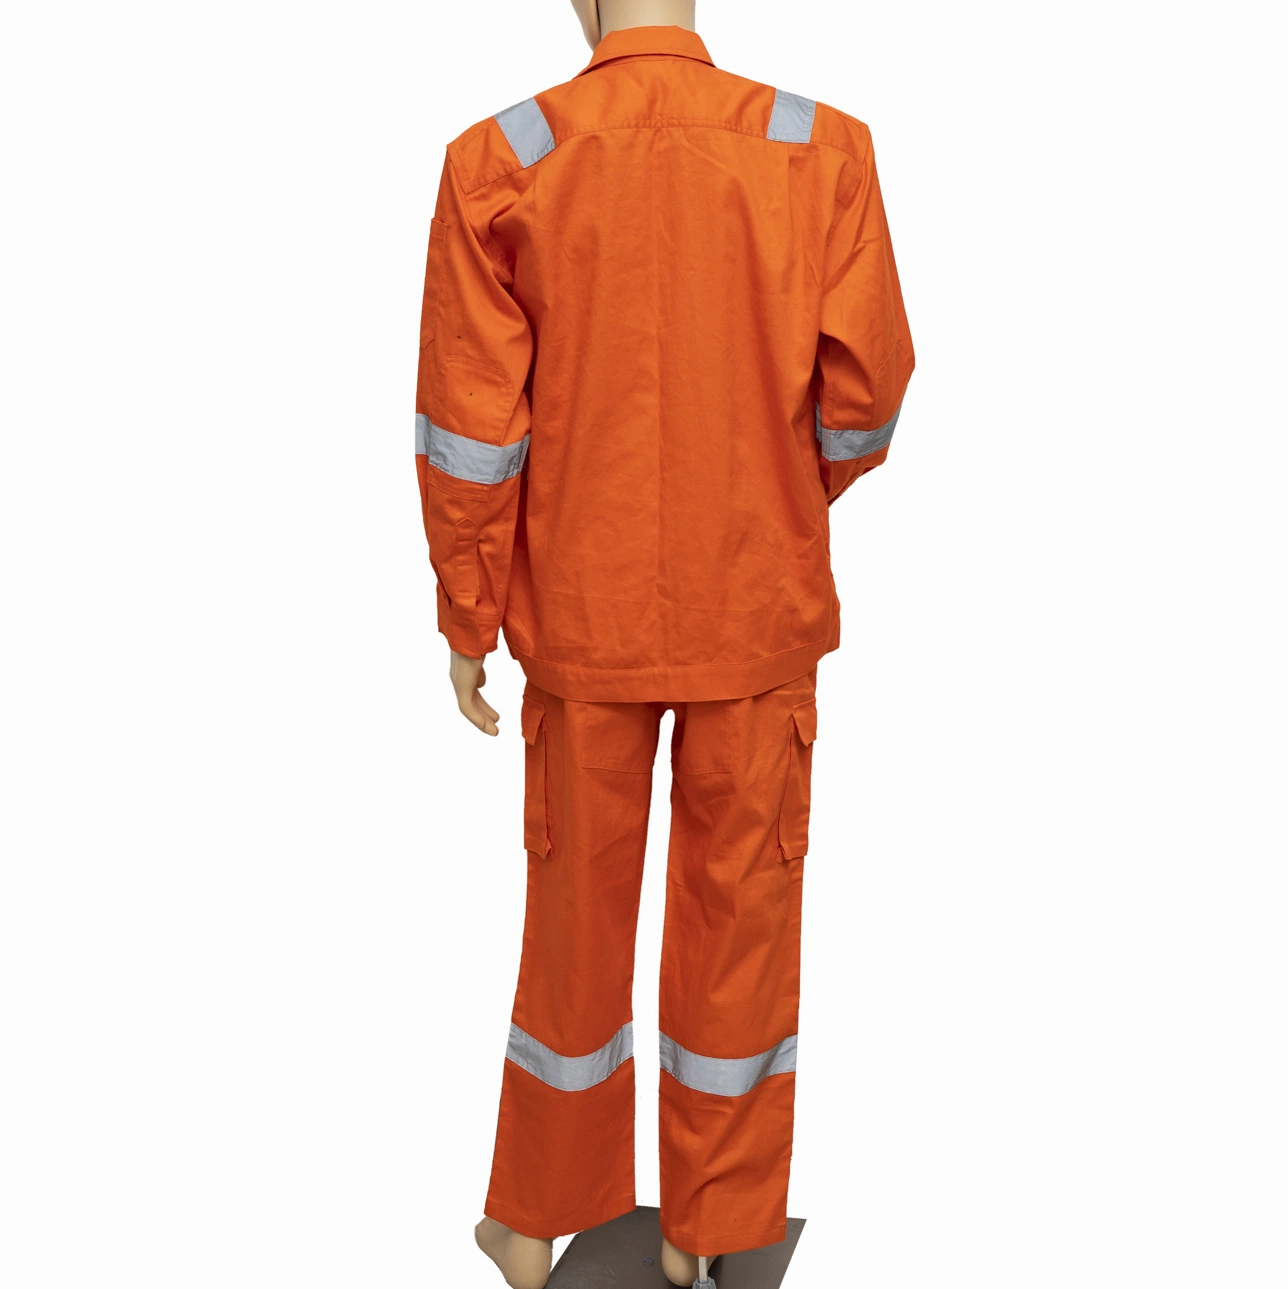 High-Visibility Safety Flame Resistant Workwear Suit - Suitable for The Logistics Industry